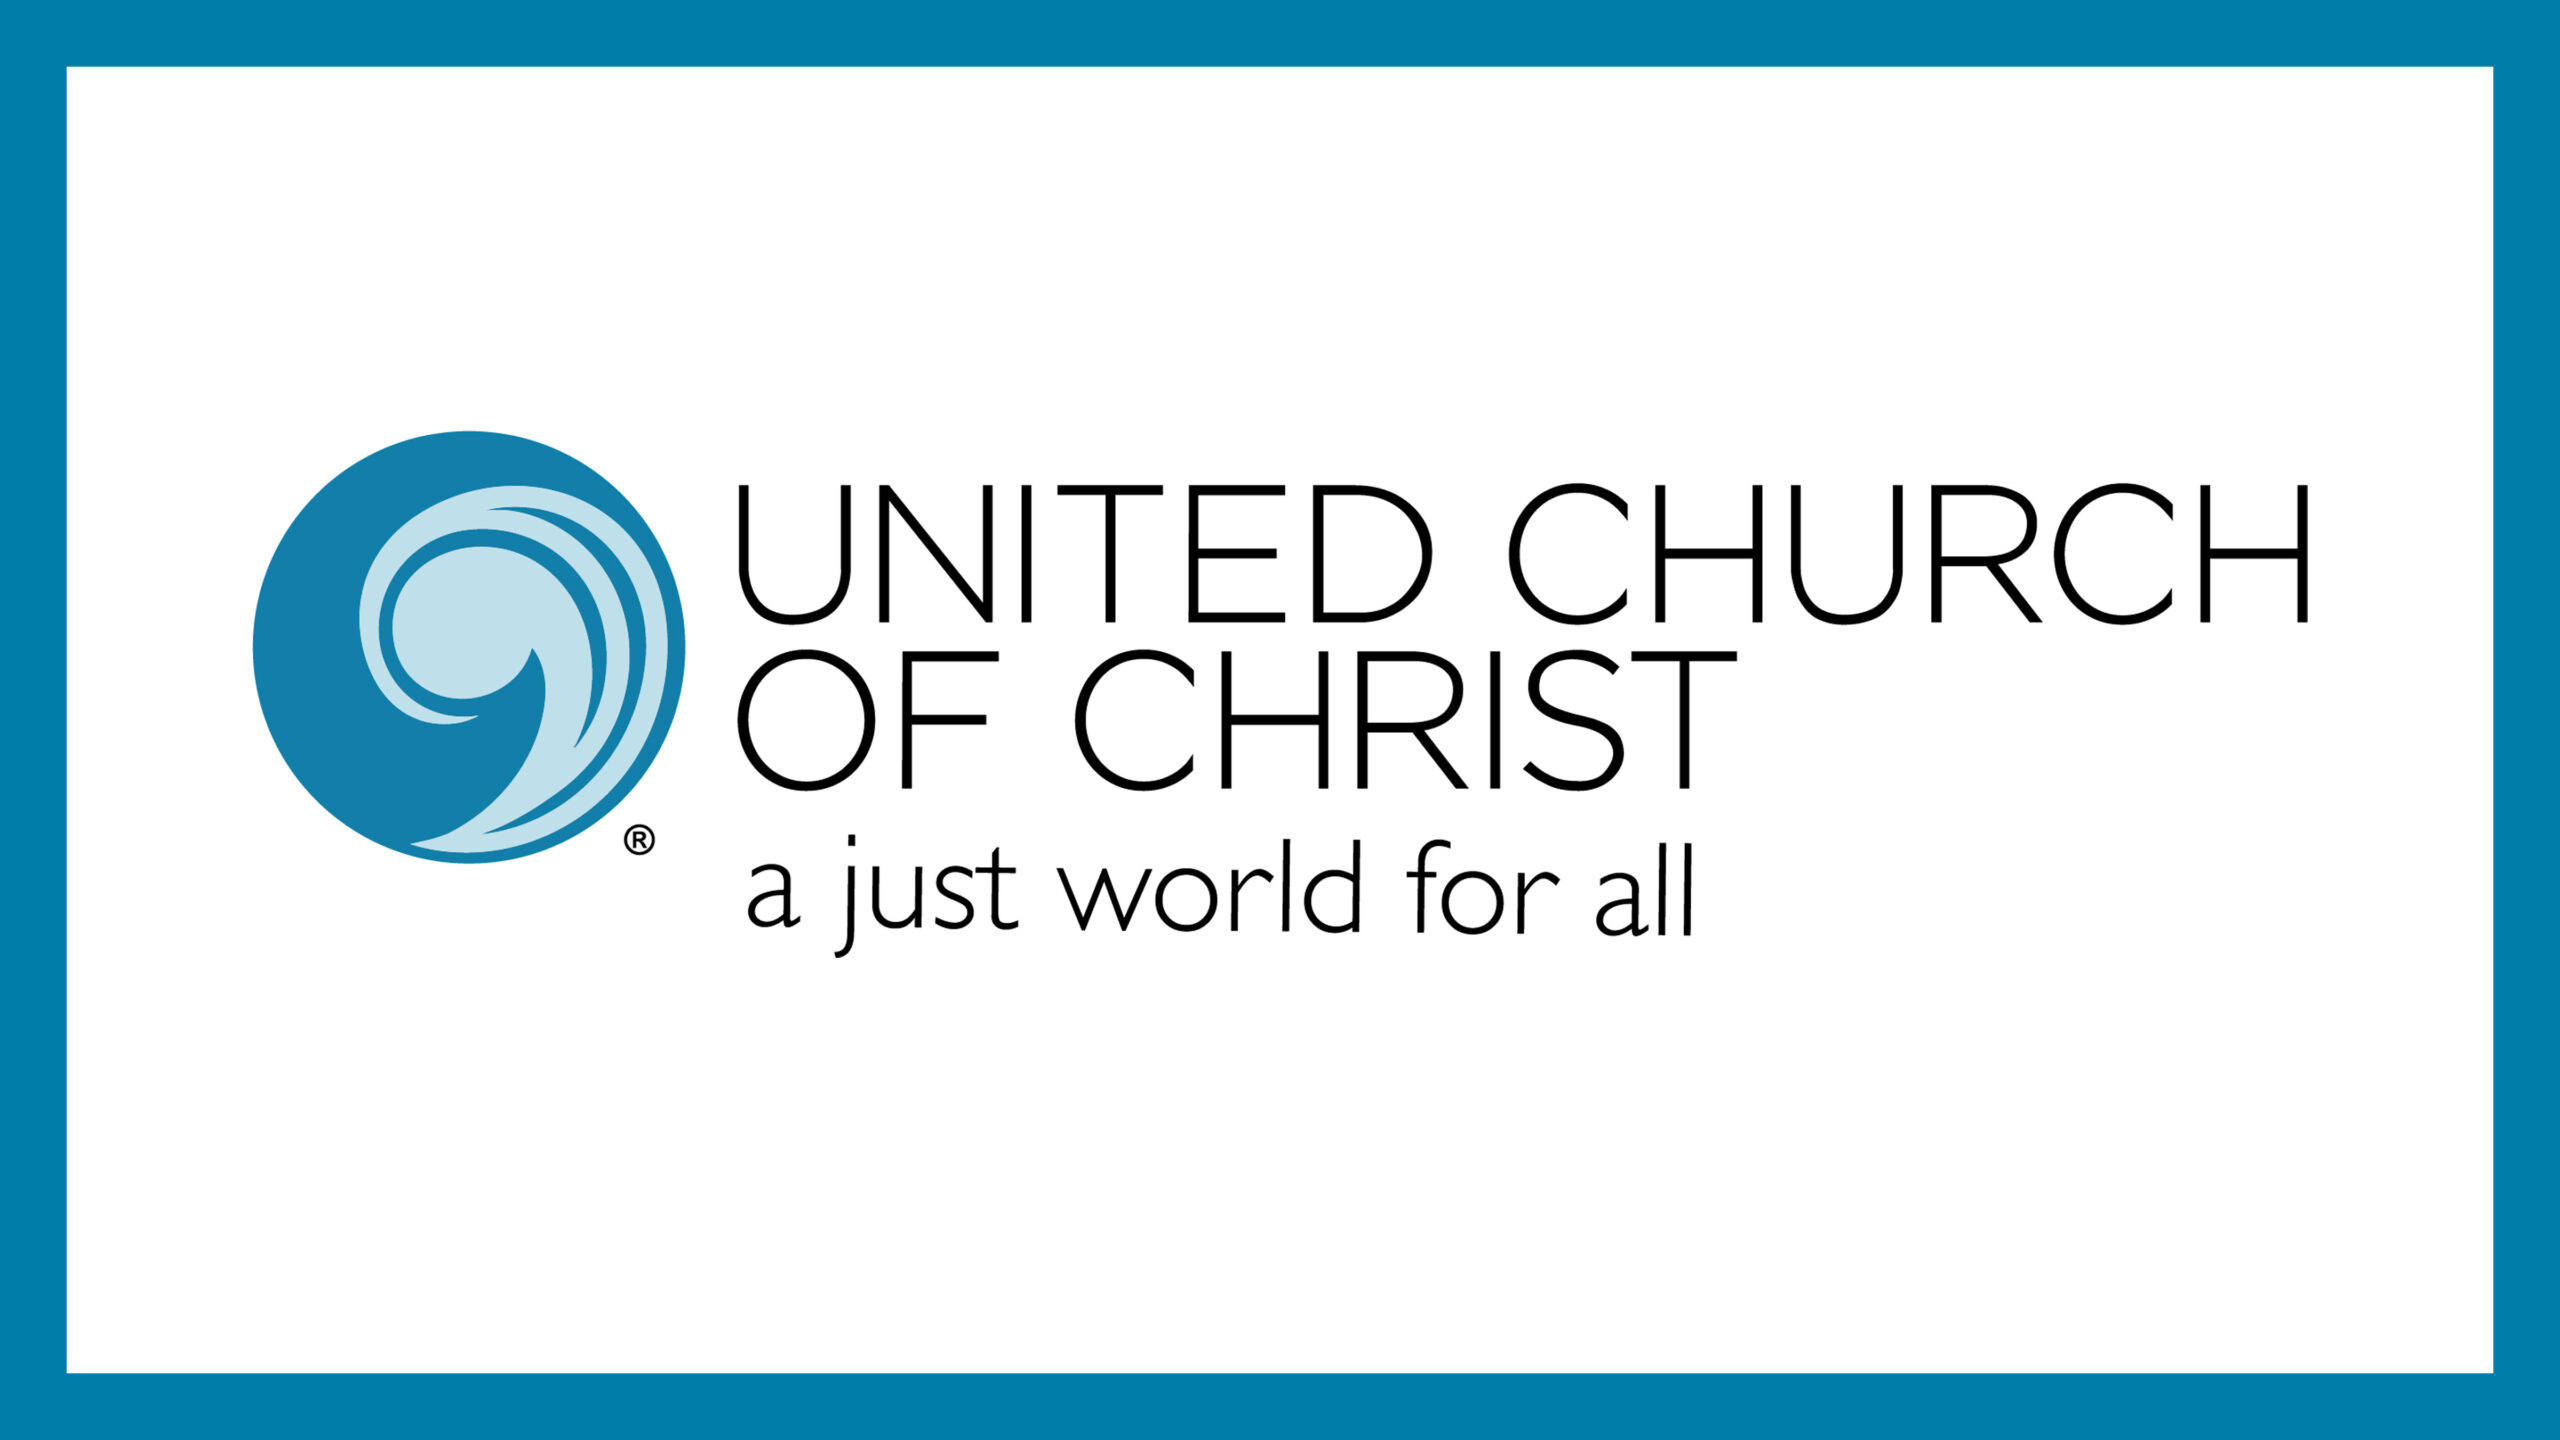 United Church of Christ: A Just World for All